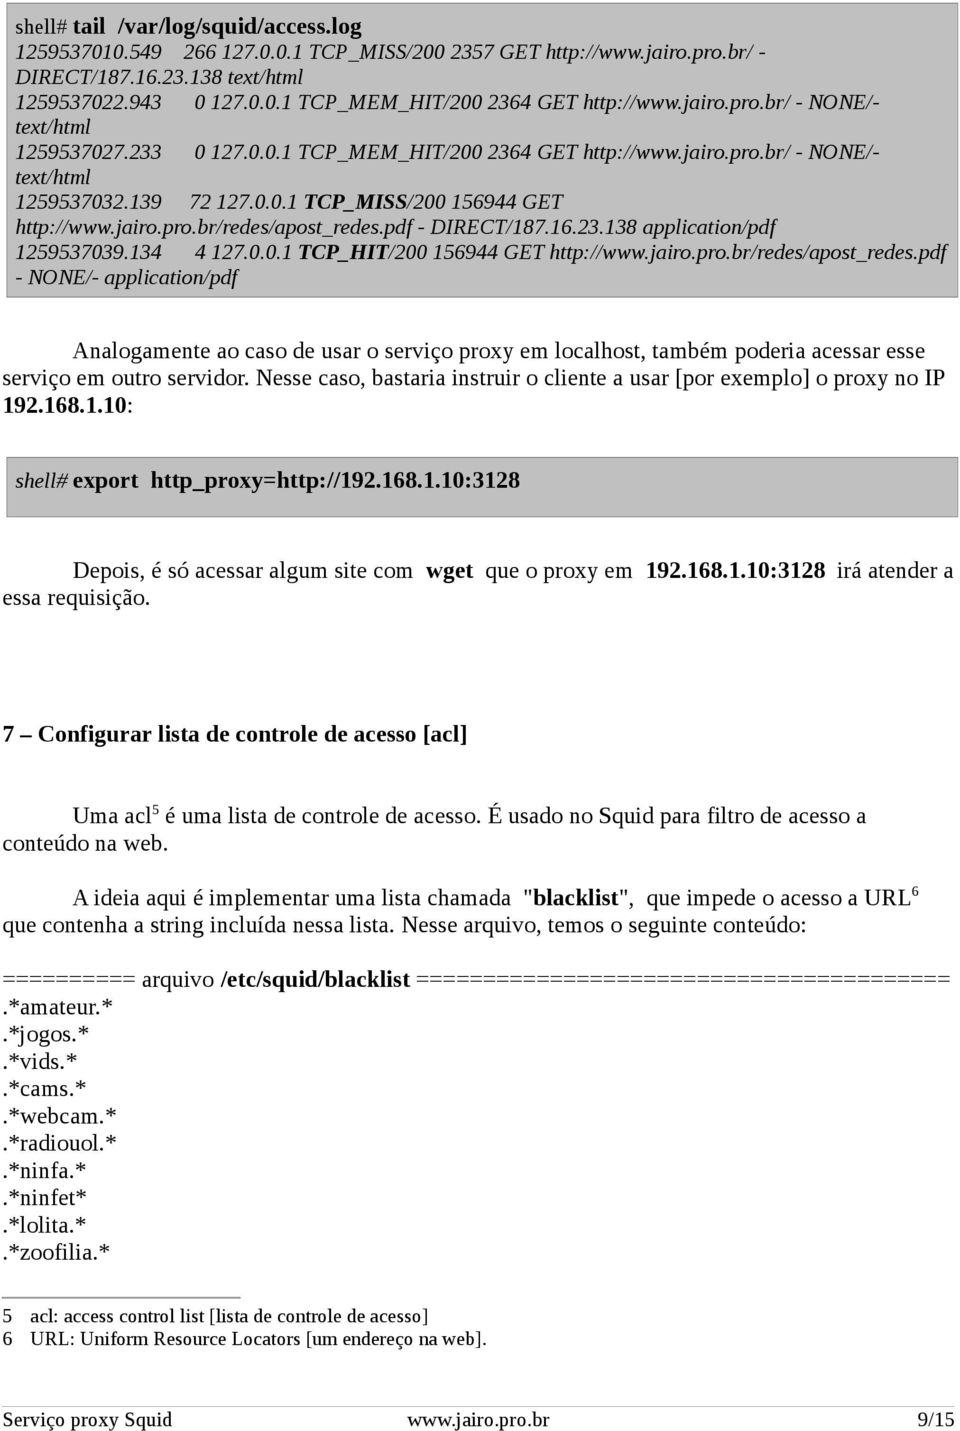 pdf - DIRECT/187.16.23.138 application/pdf 1259537039.134 4 127.0.0.1 TCP_HIT/200 156944 GET http://www.jairo.pro.br/redes/apost_redes.